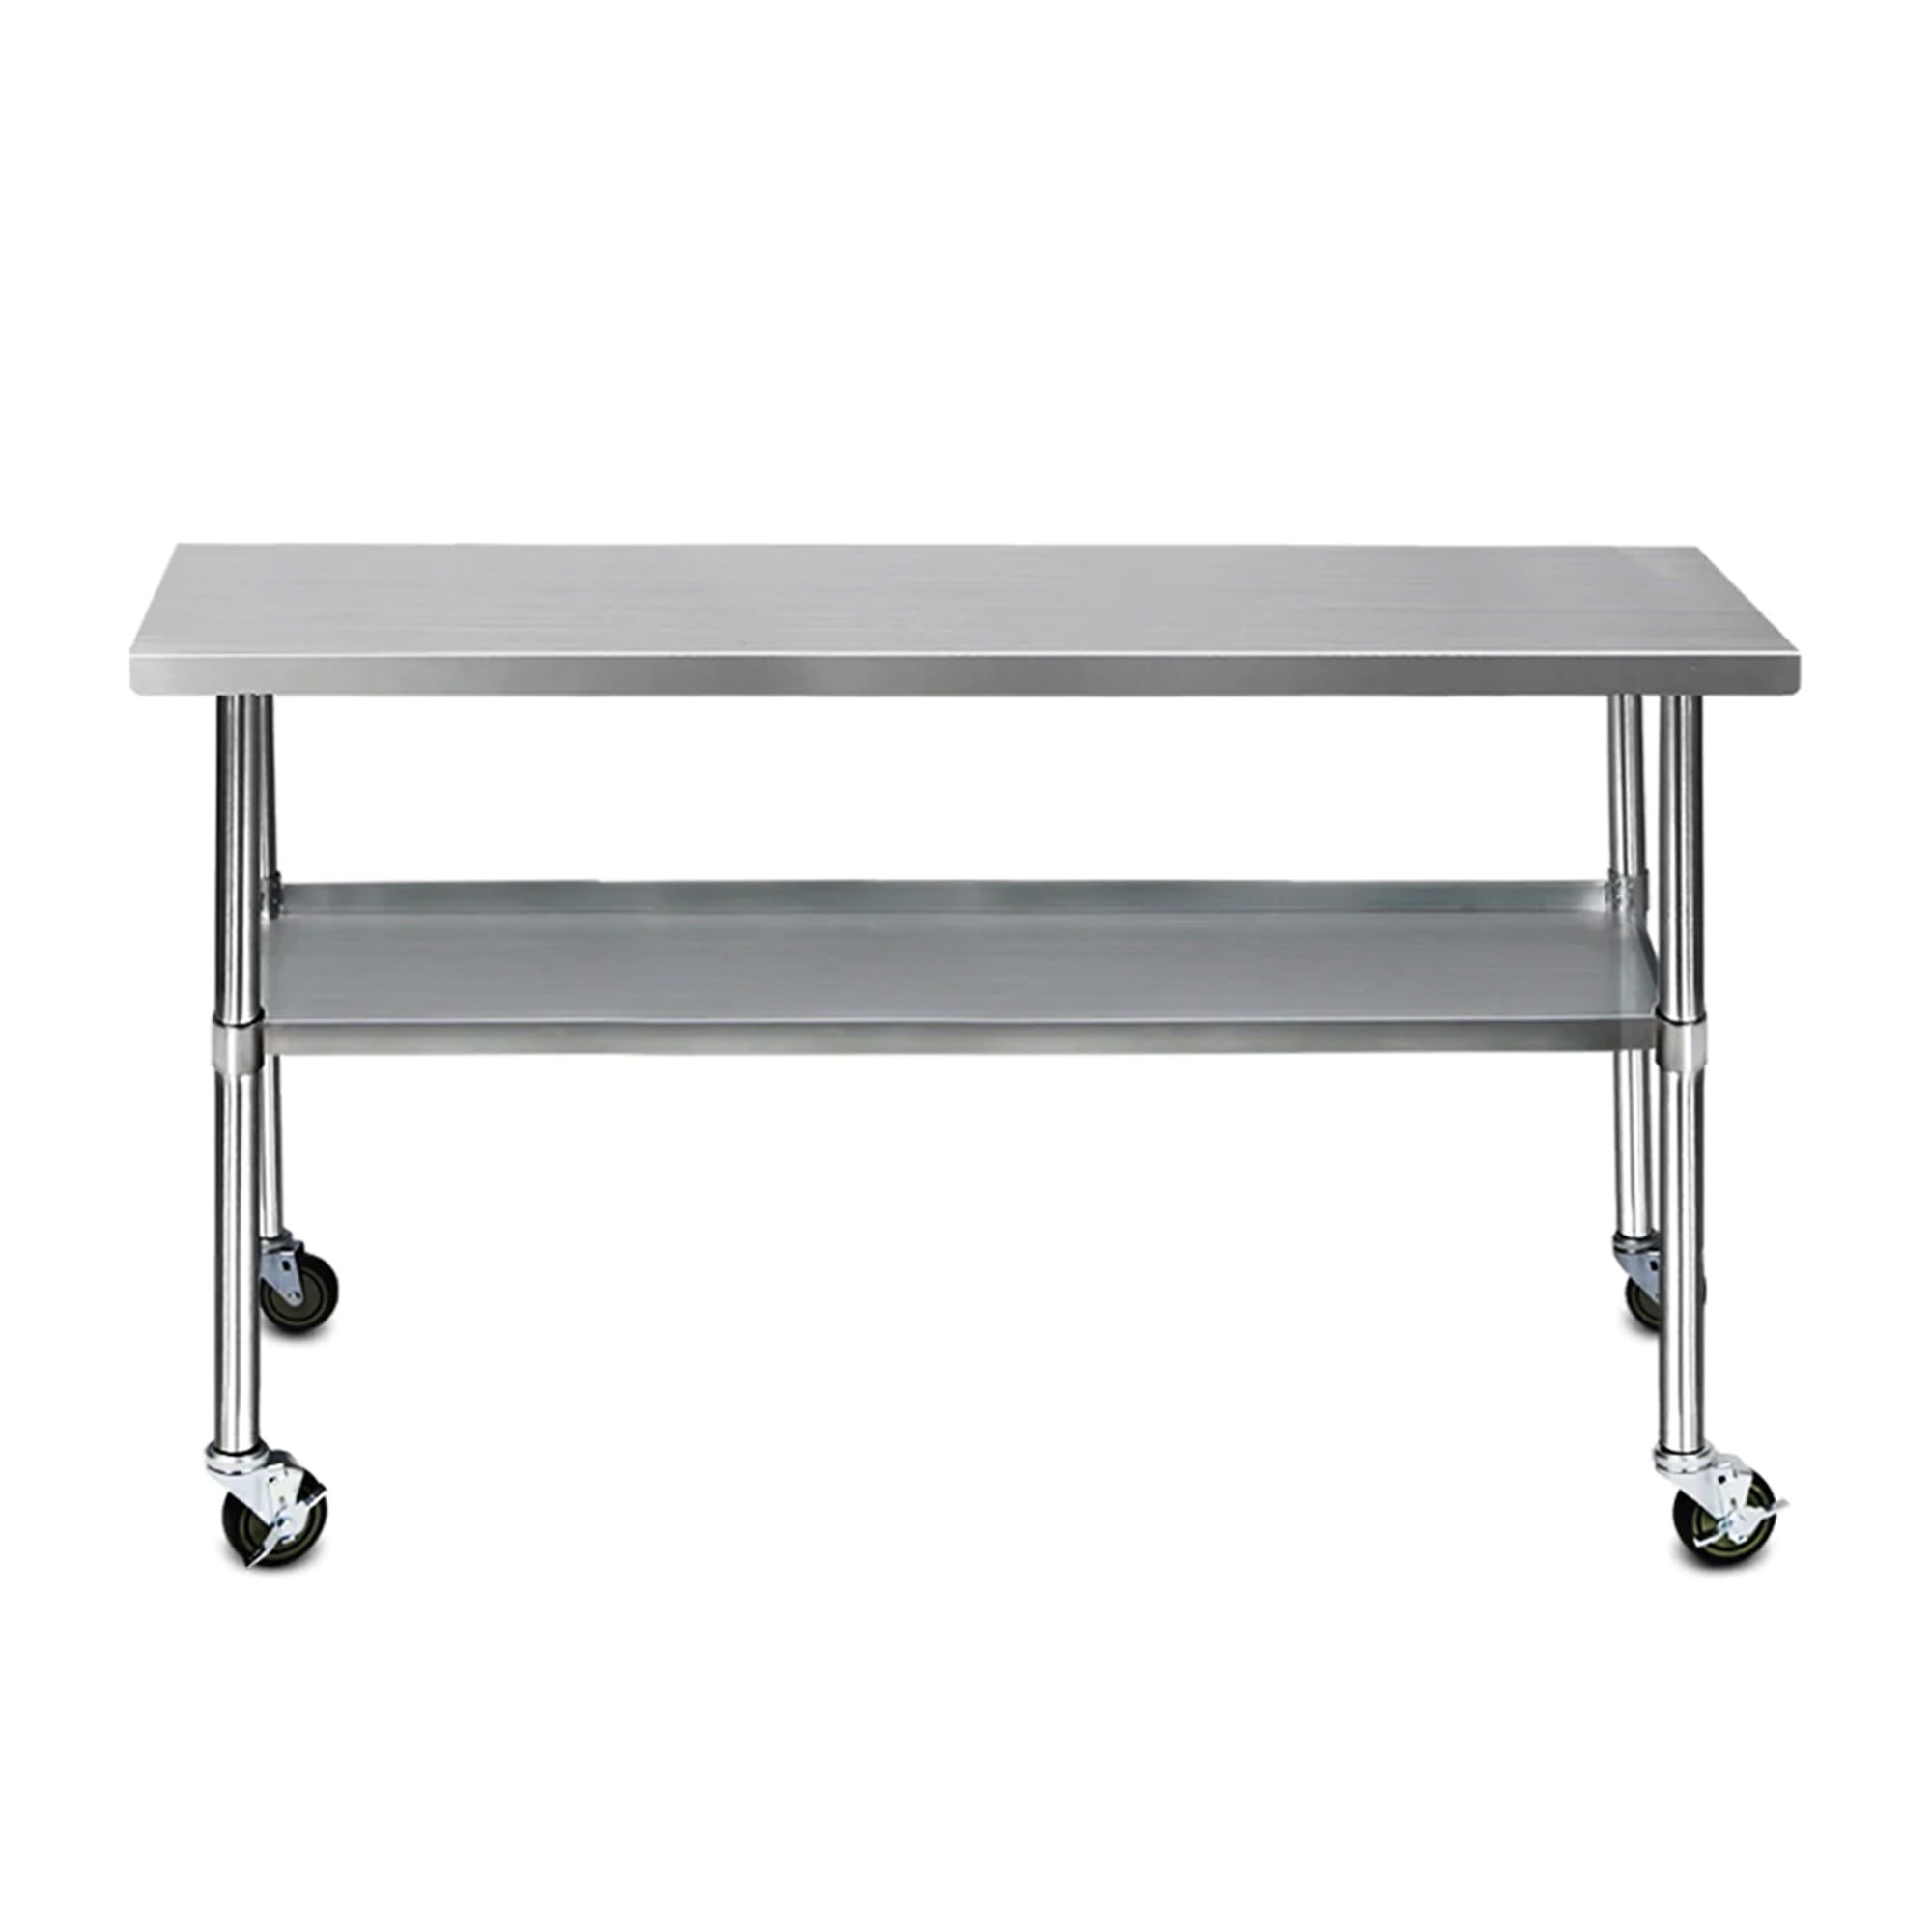 Cefito 304 Stainless Steel Kitchen Bench with Wheels 182.9x61cm Image 2